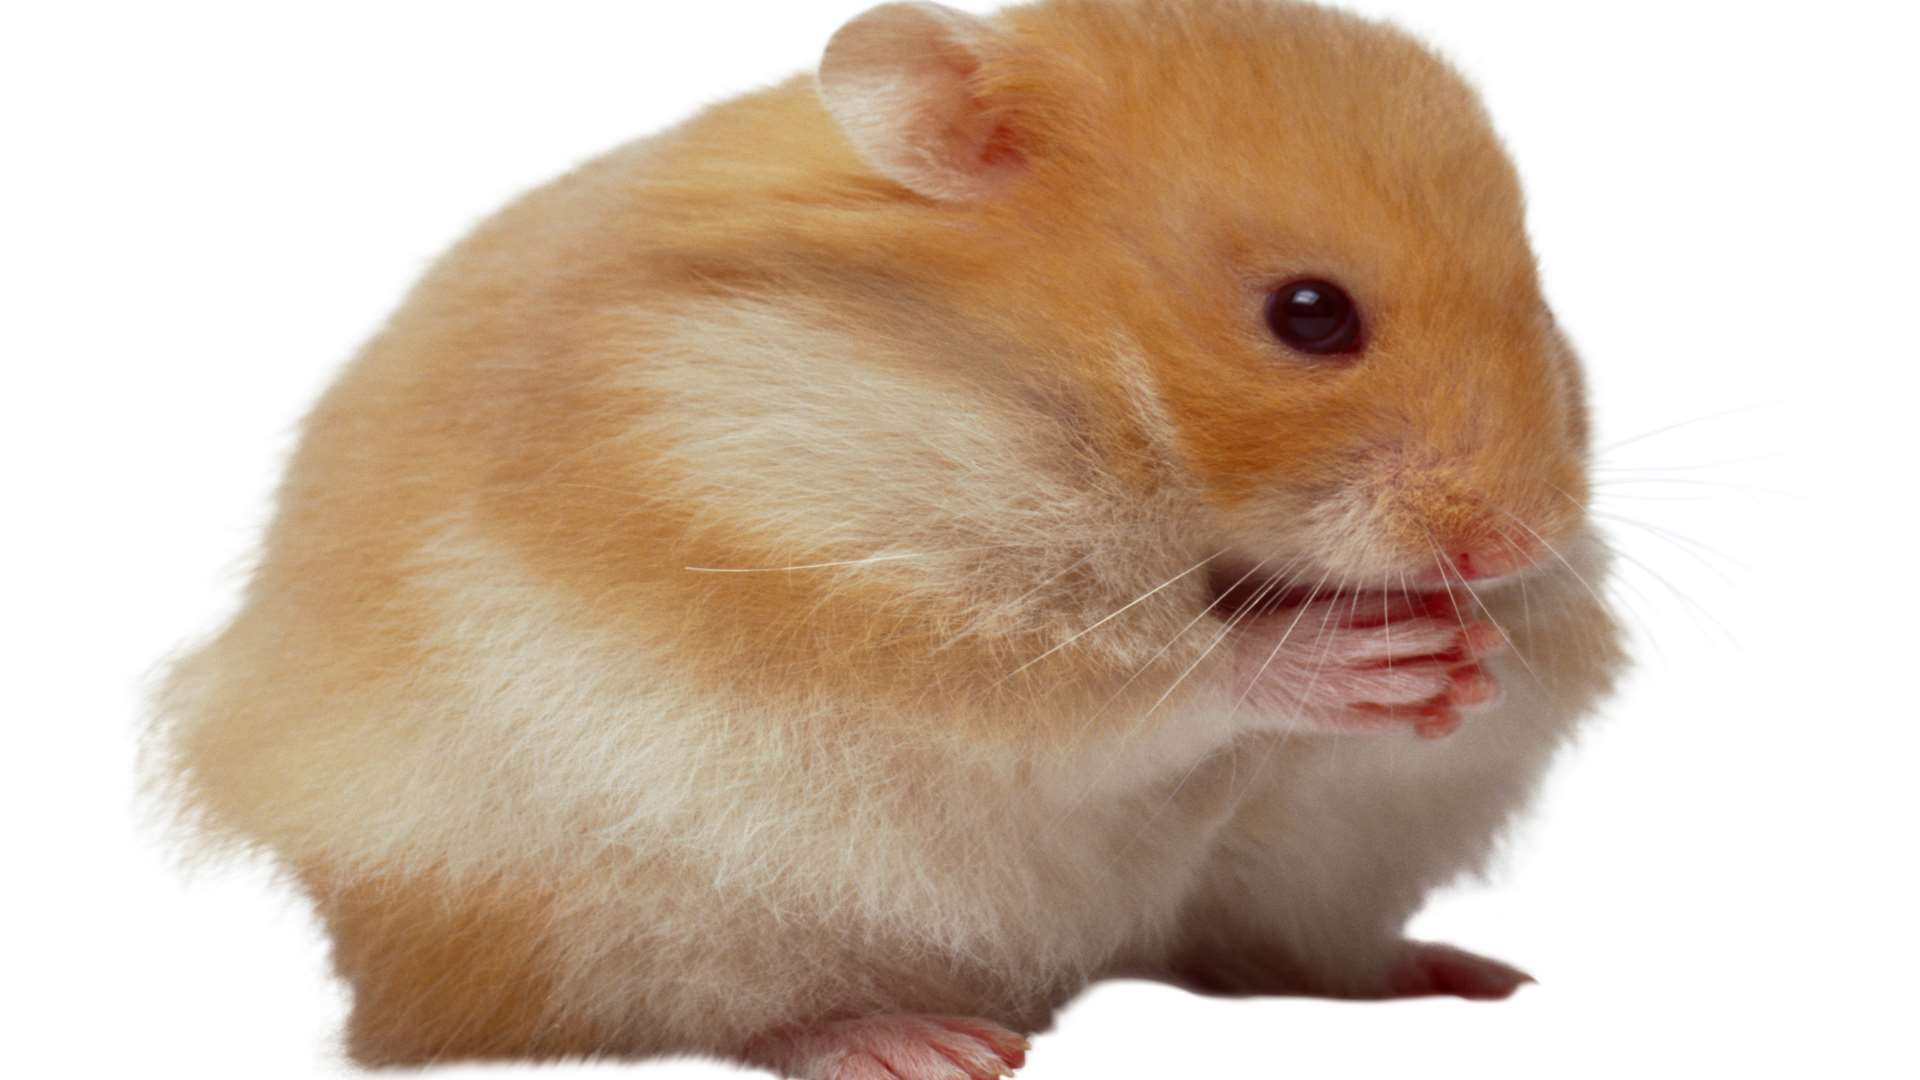 Fox admitted killing a hamster. Stock image